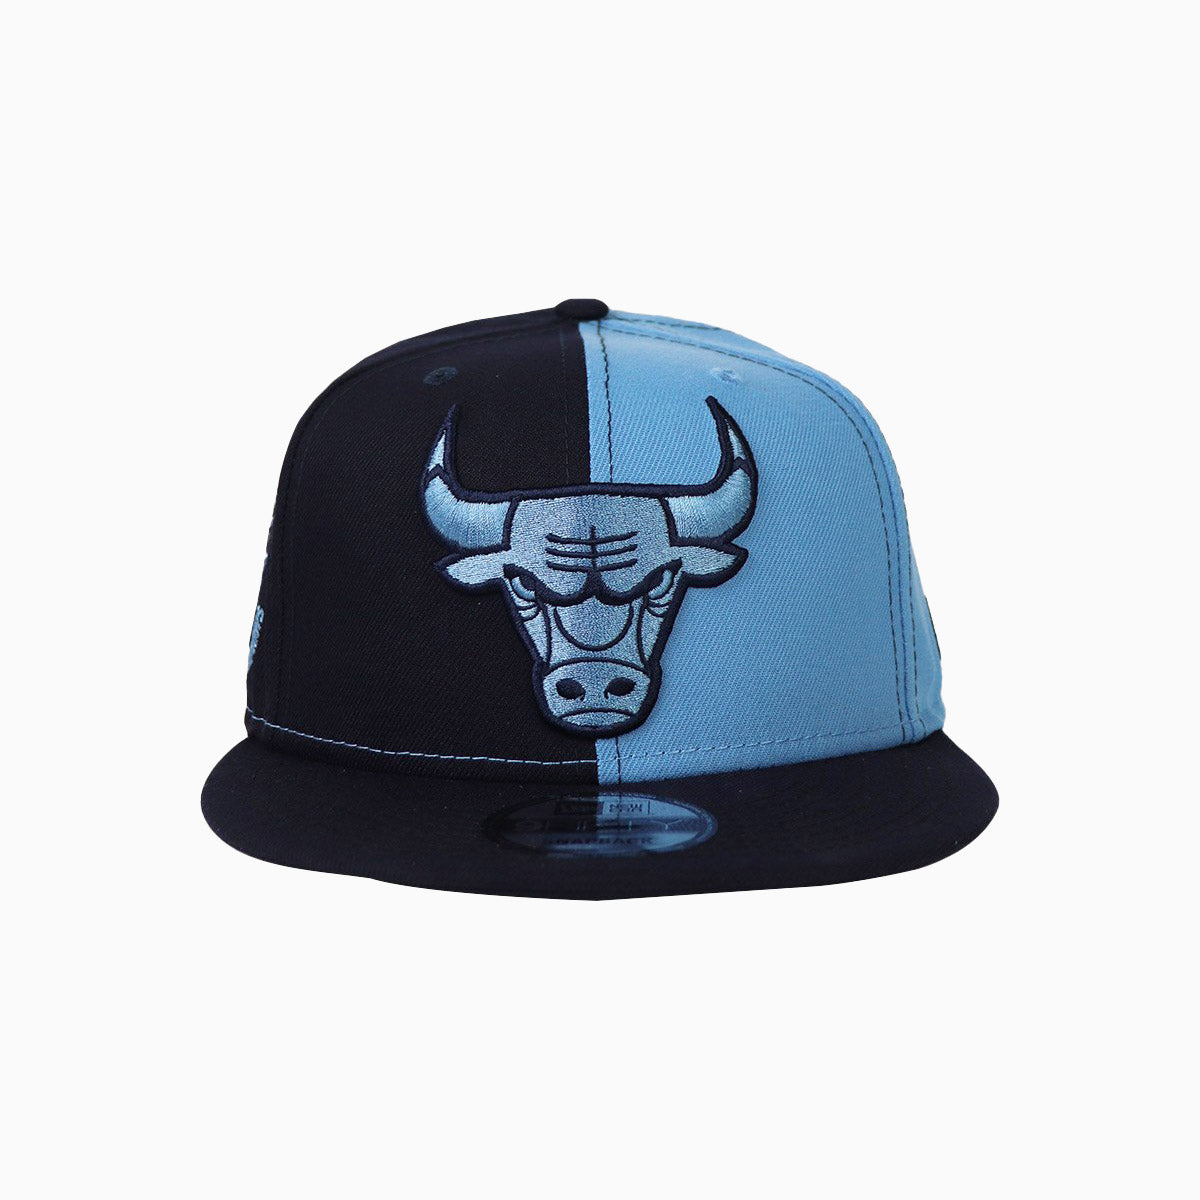 New Era Chicago Bulls Gray Champions Two Tone Edition 9Fifty Snapback Hat, EXCLUSIVE HATS, CAPS